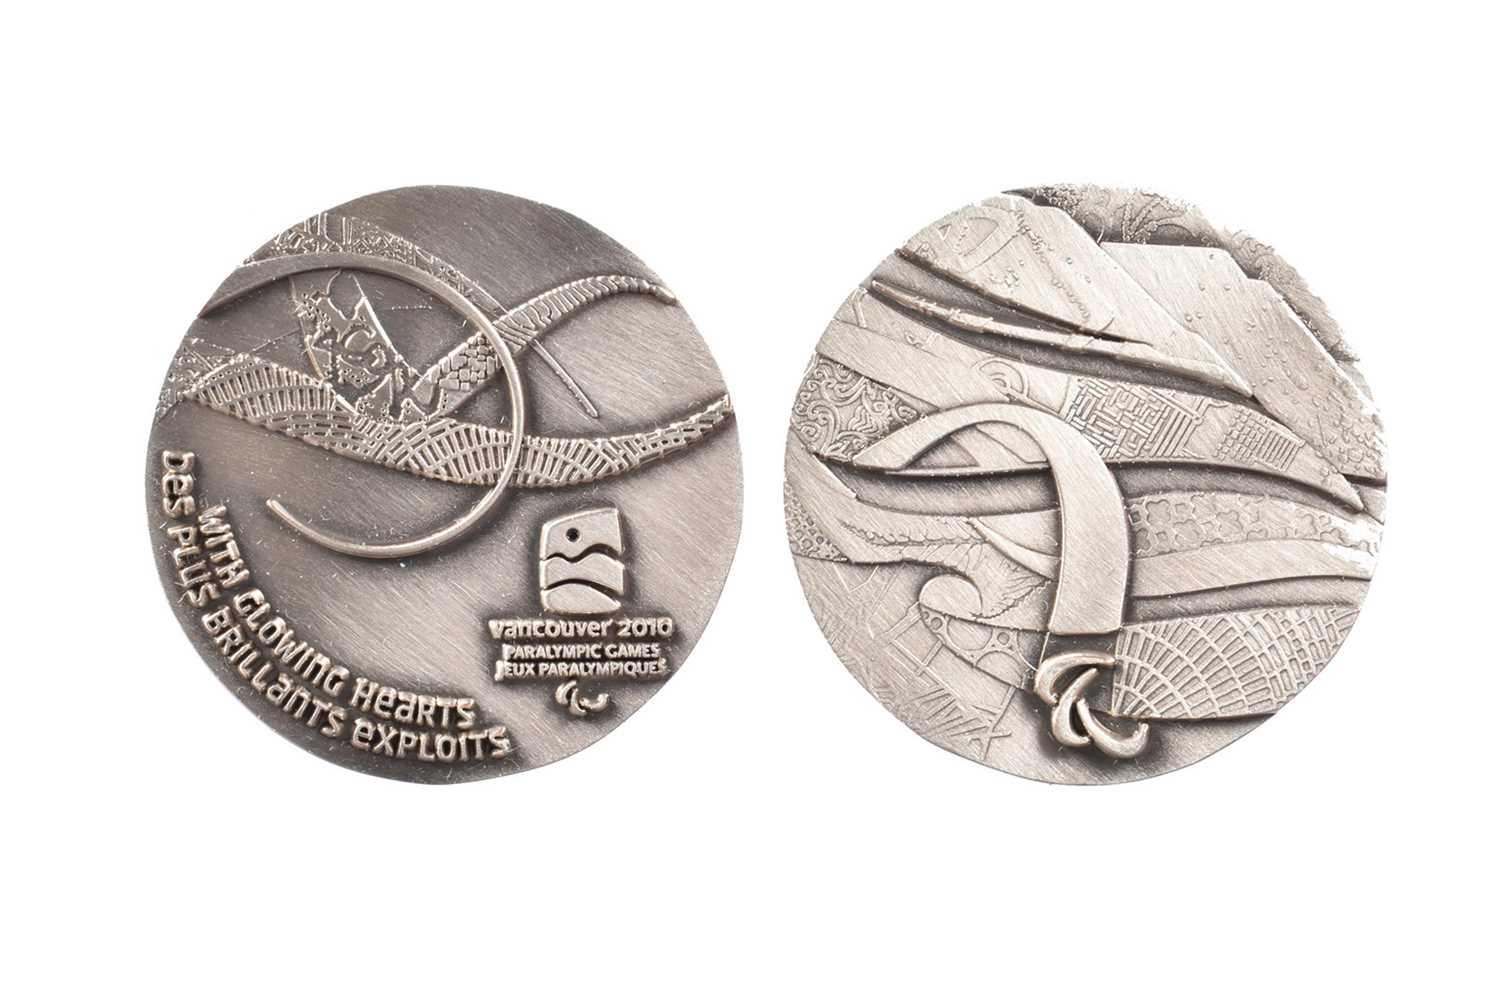 Lot 75 - 2010 Vancouver Winter Paralympic Volunteers Participation medal